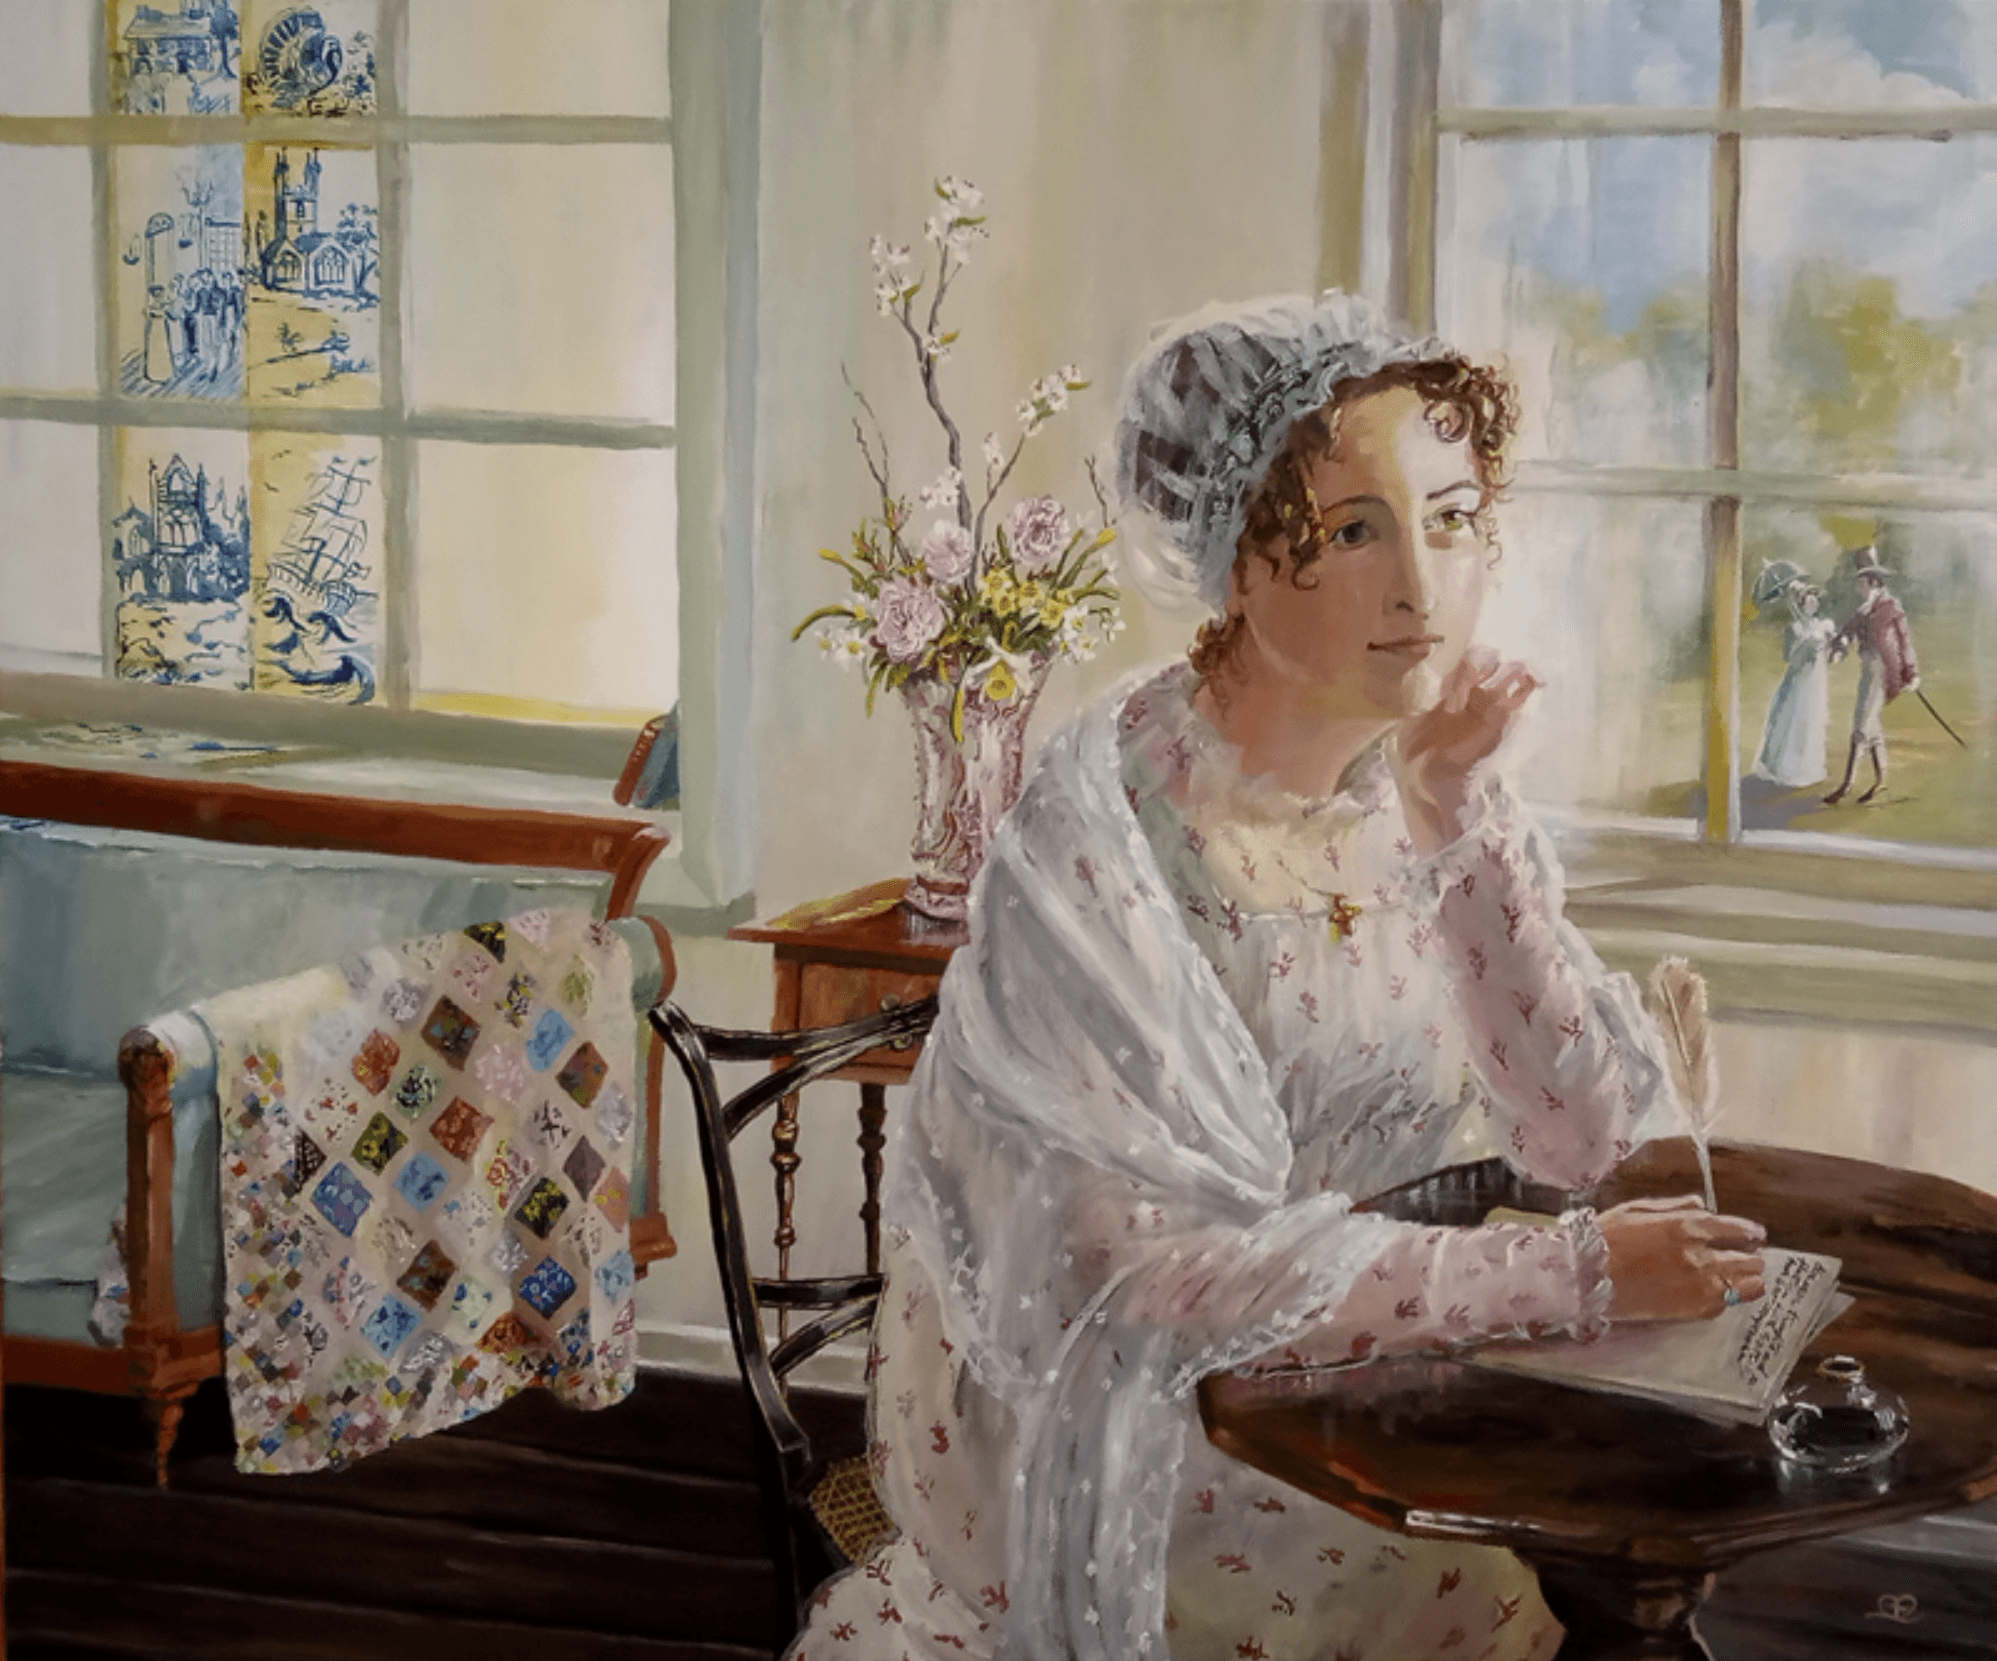 painting of Jane Austen writing about her travels and experiences at her desk